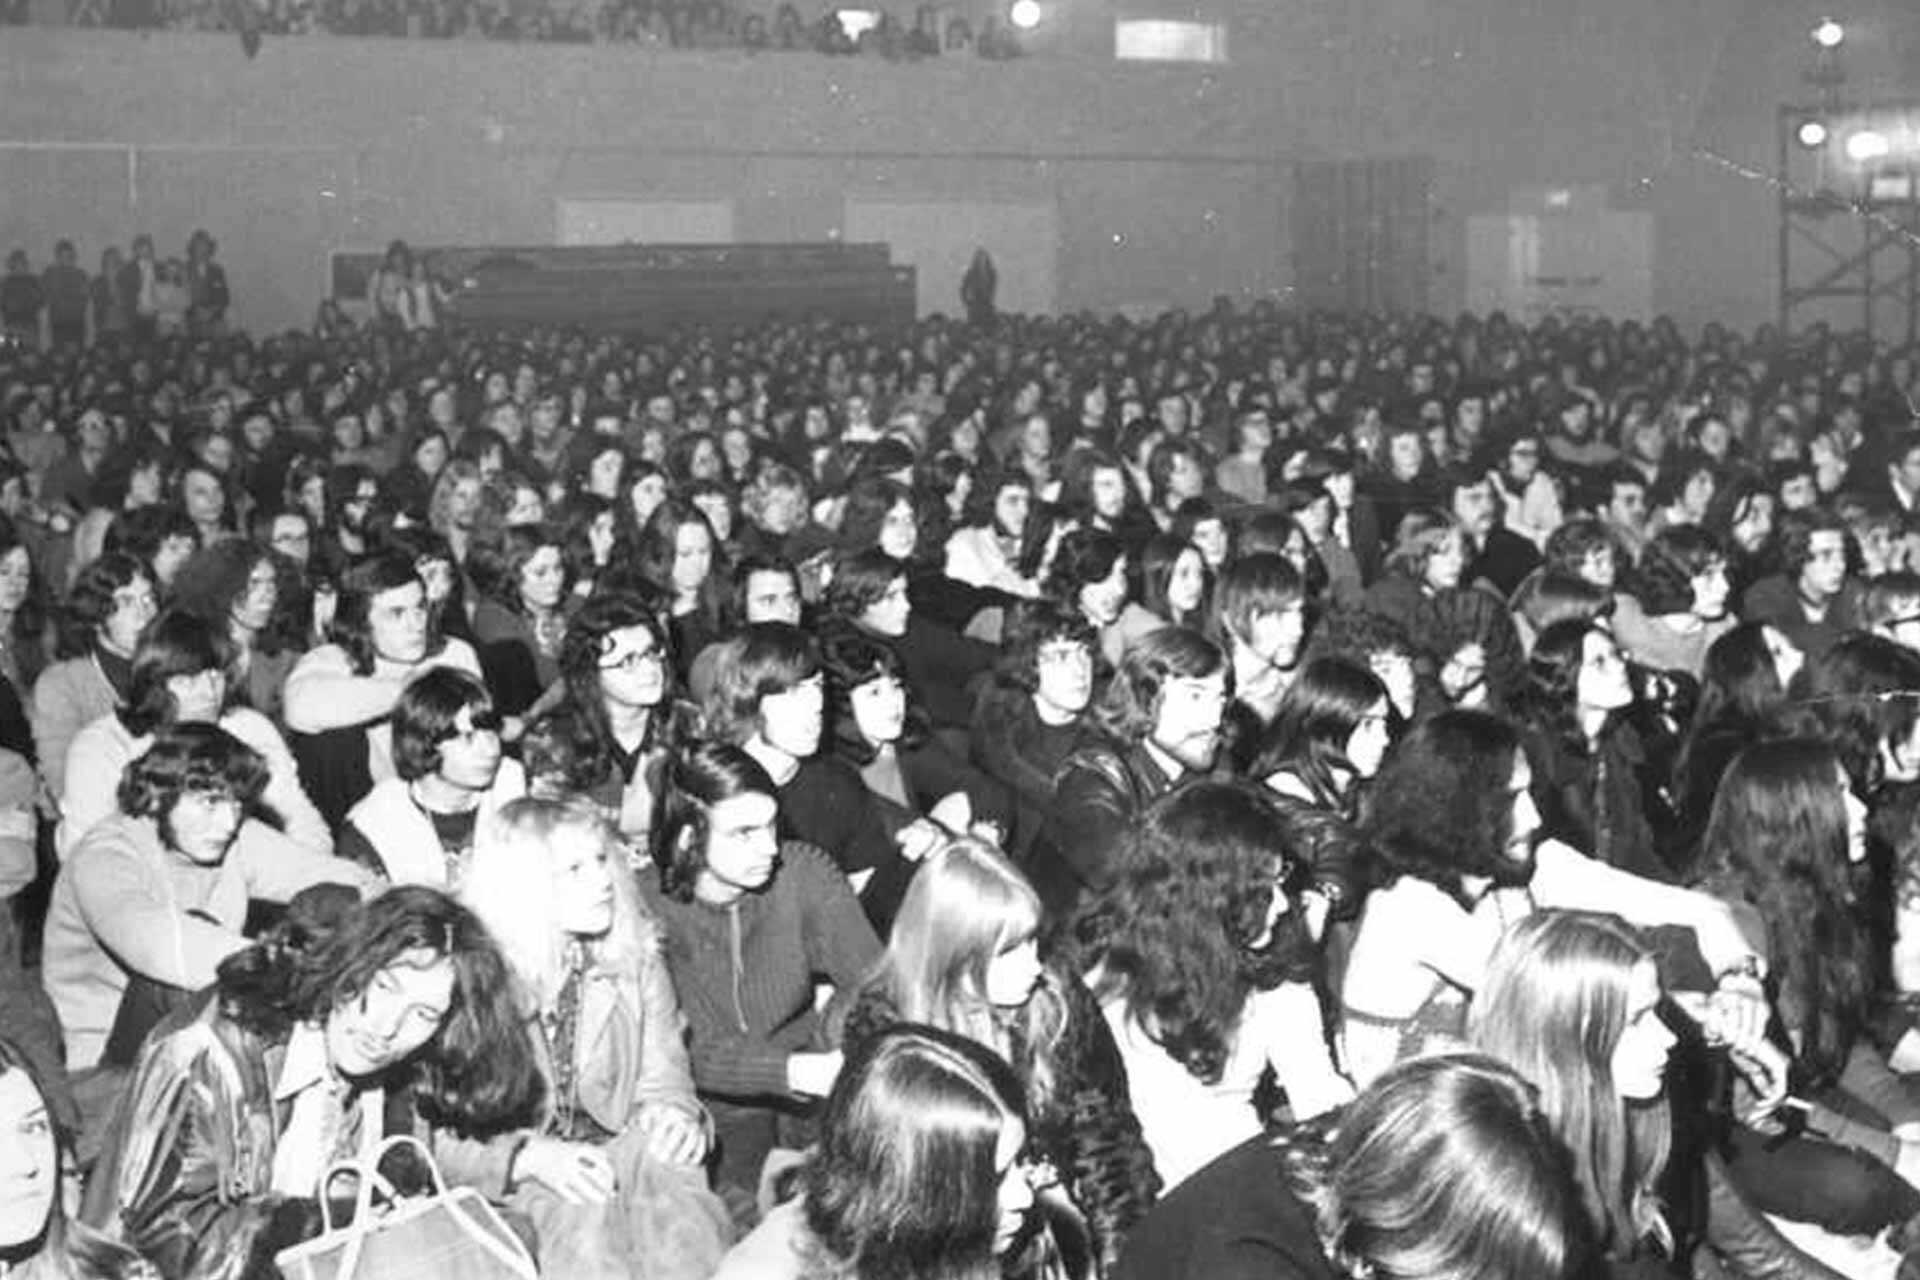 Students waiting in the Sports Hall for Led Zeppelin